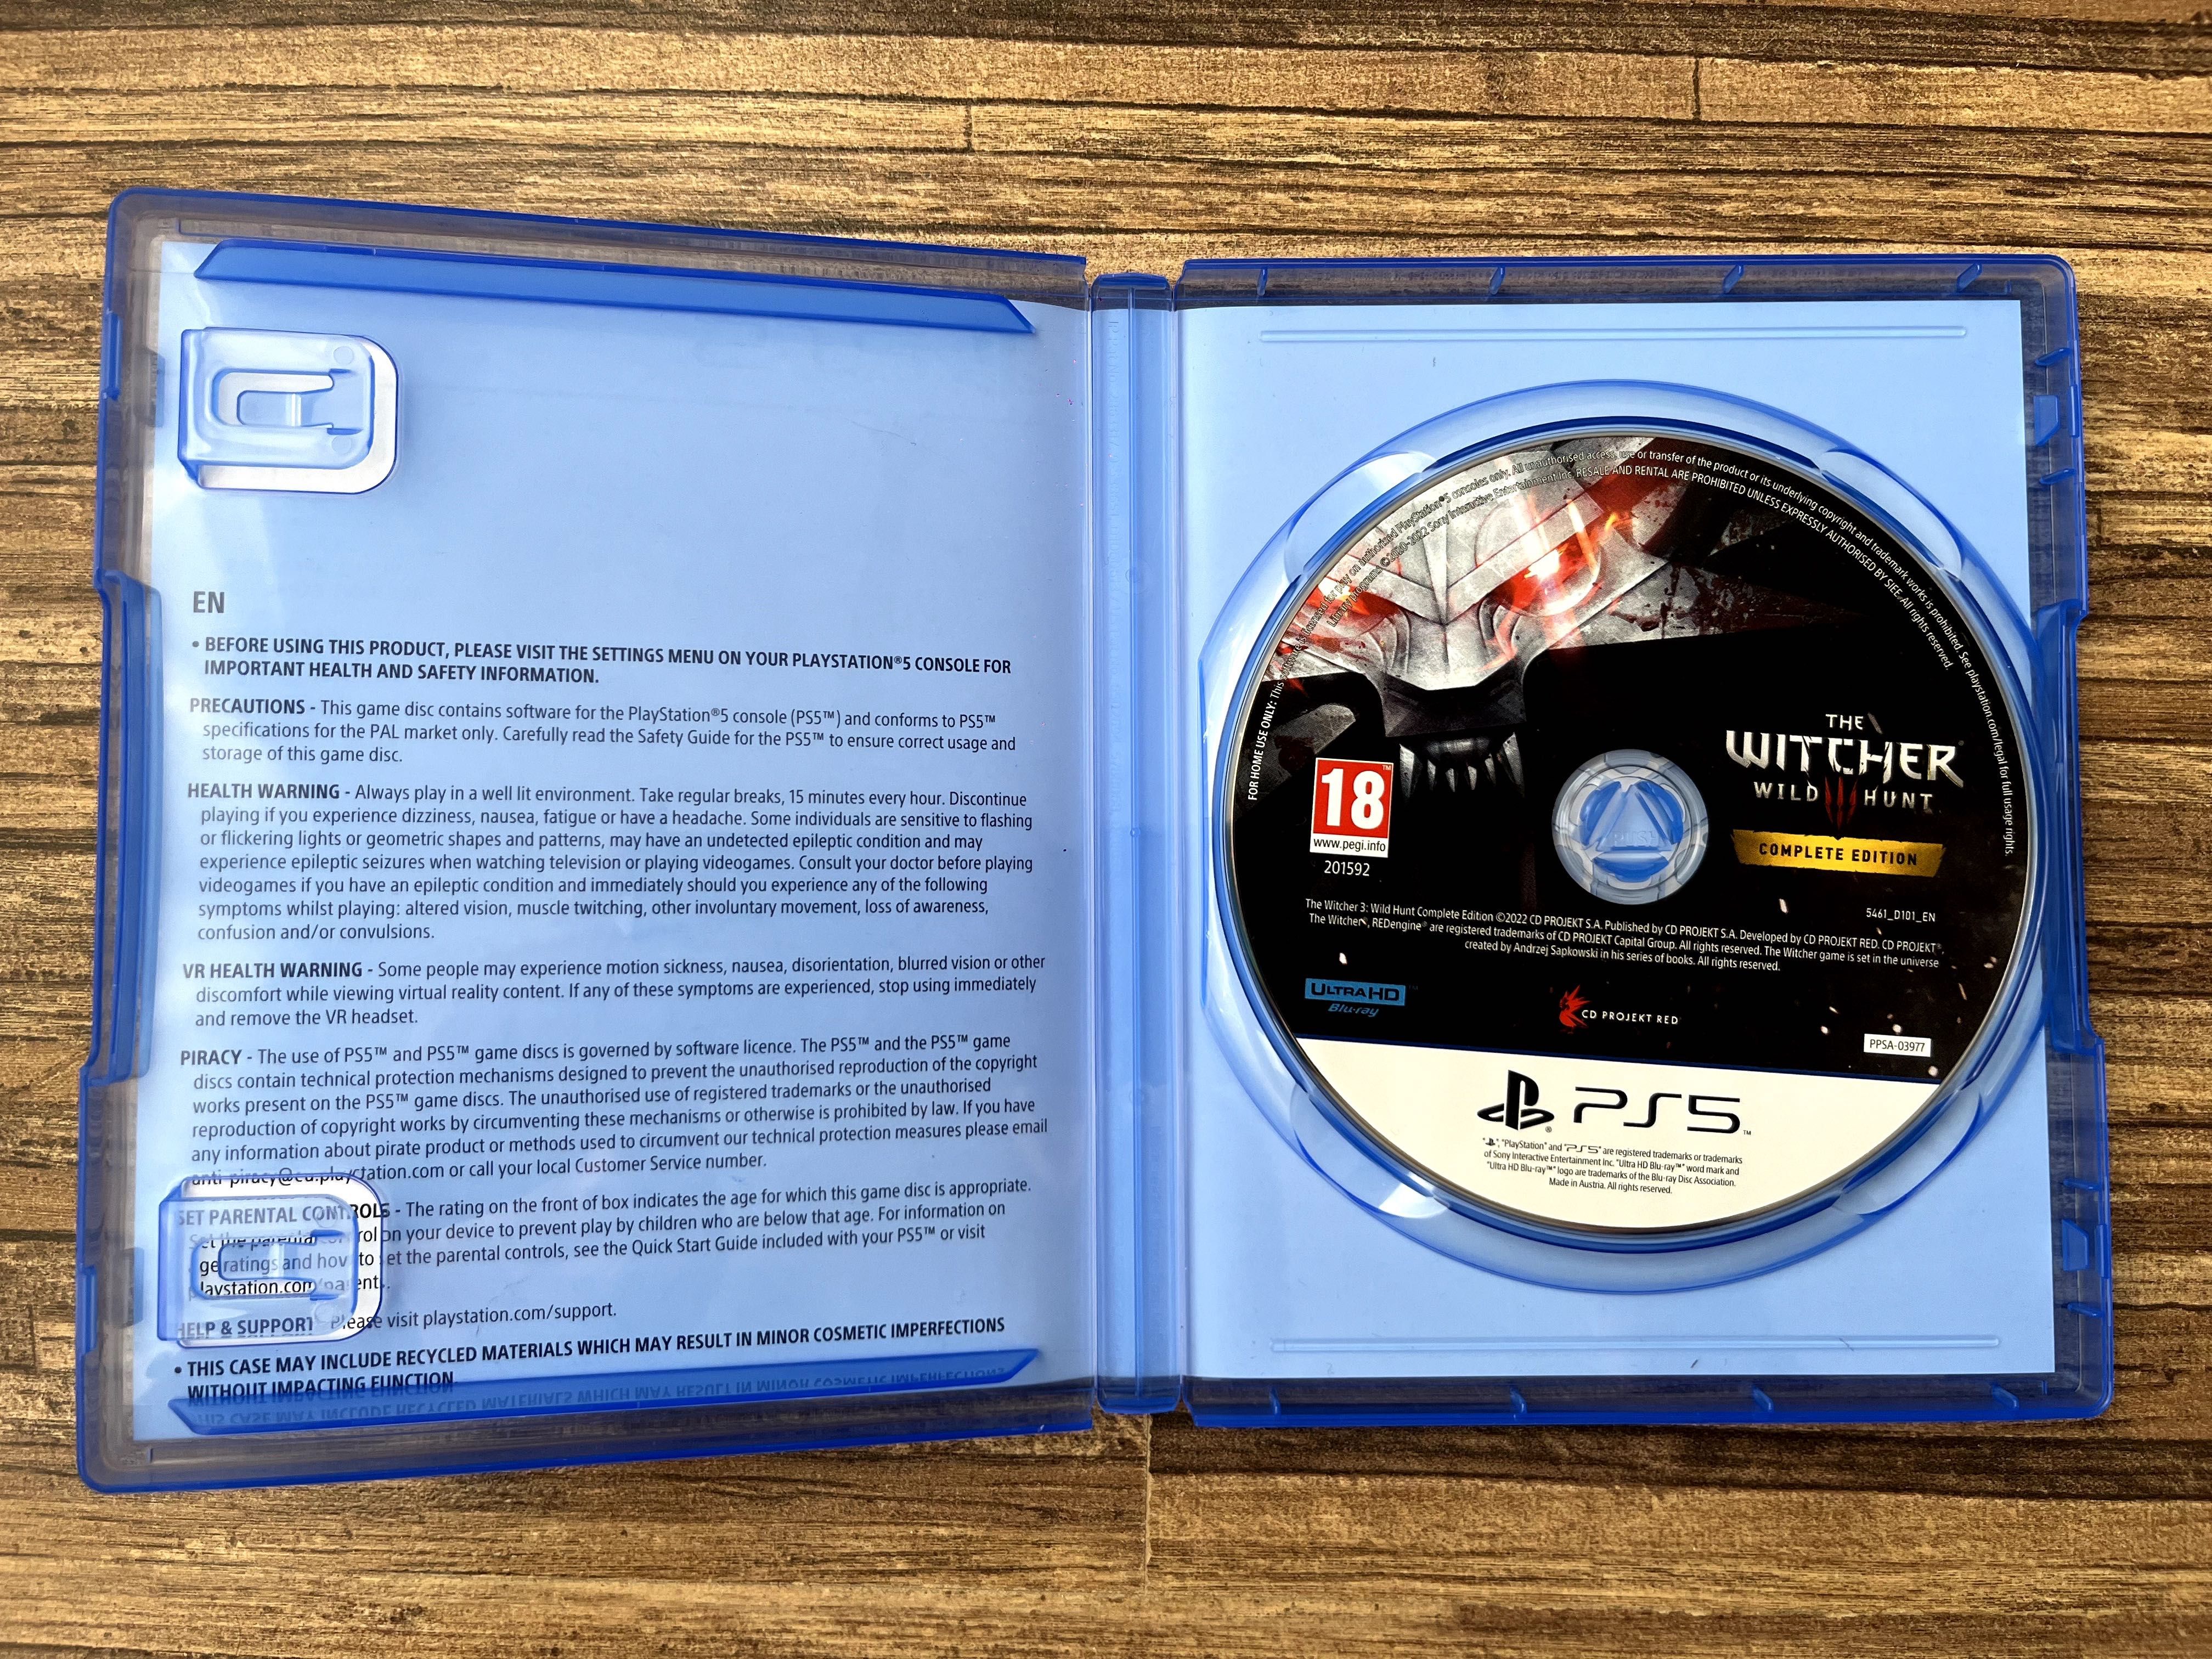 CD PROJEKT The Witcher III Wild Hunt [Complete Edition] (PS5)